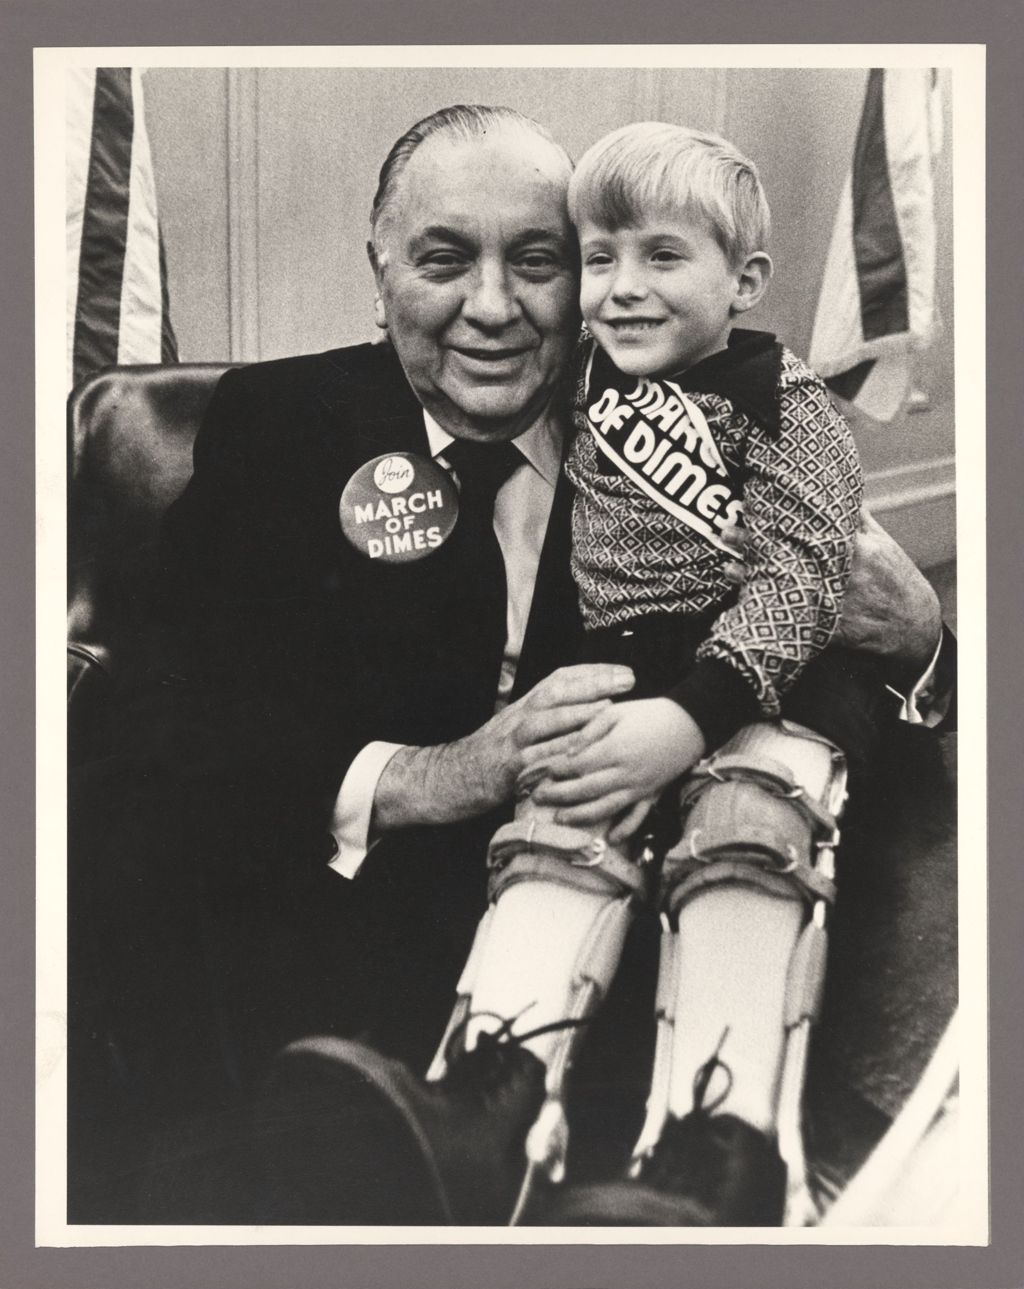 Richard J. Daley with March of Dimes representative